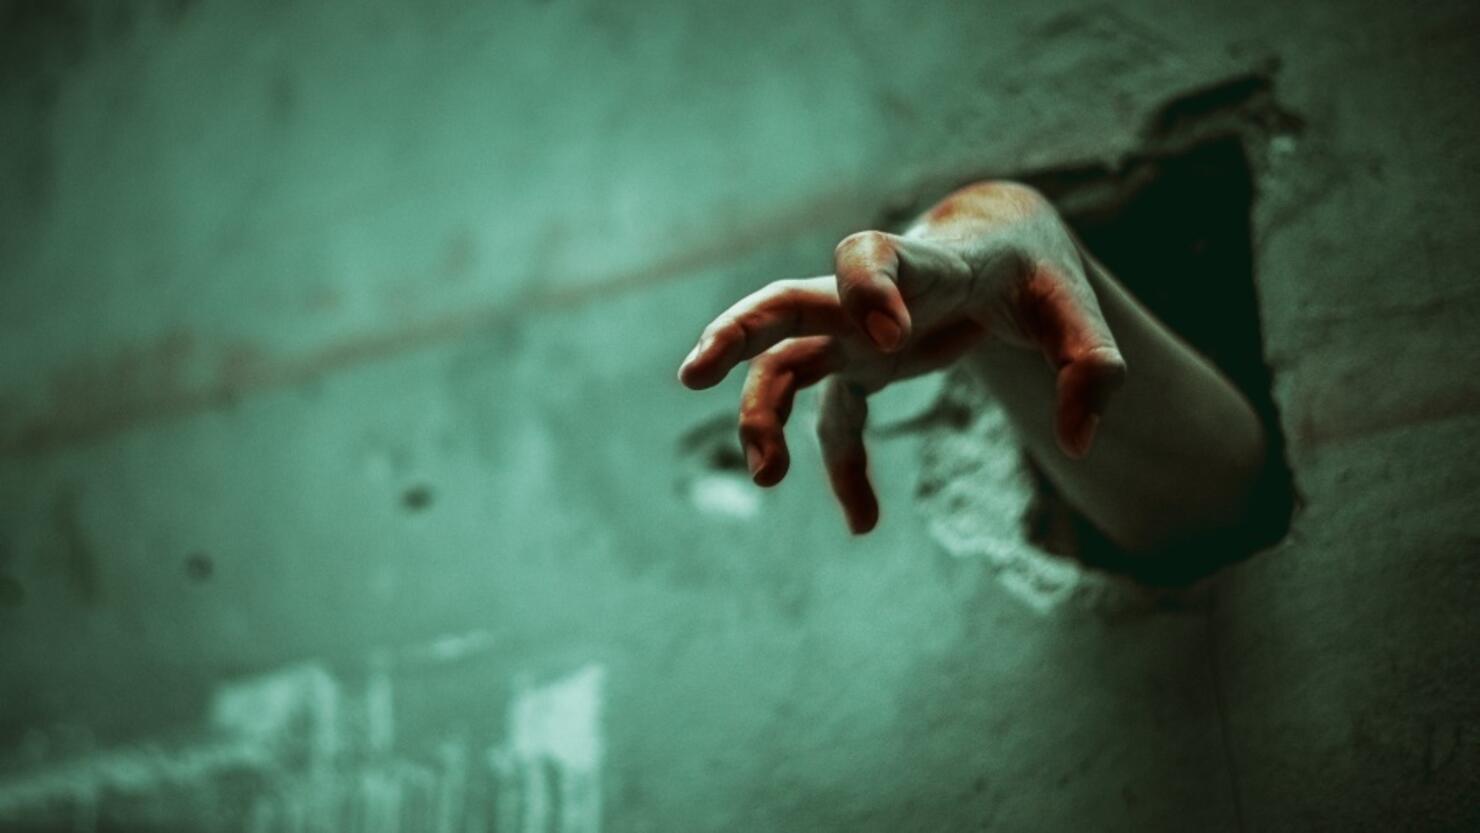 Zombie hand through the cracked wall. Horror and scary film concept. Halloween day theme. Green tone like ghost movie